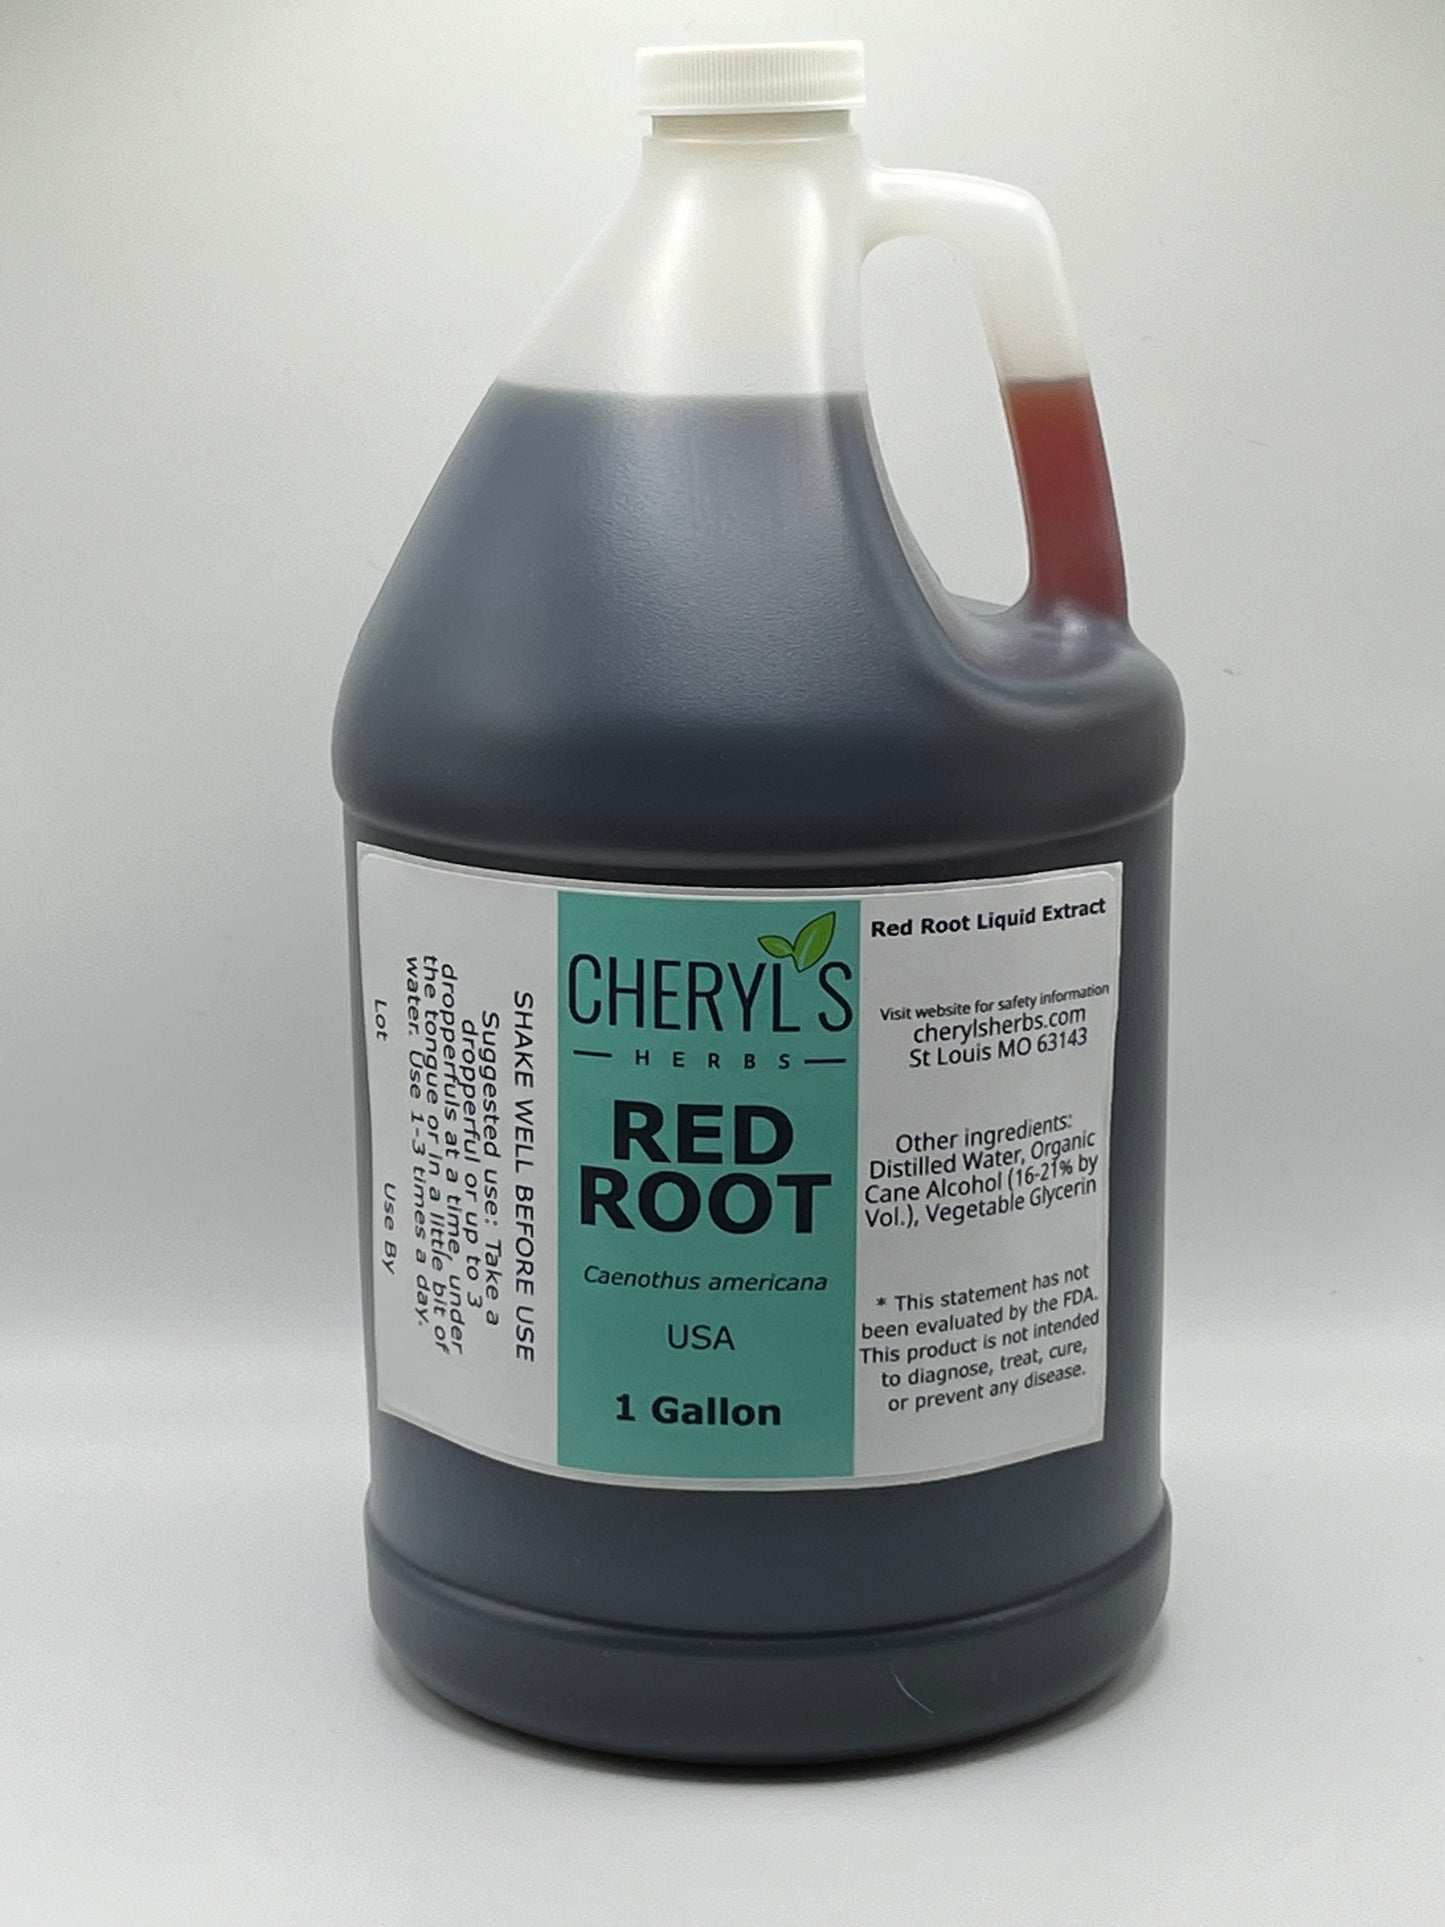 RED ROOT LIQUID EXTRACT